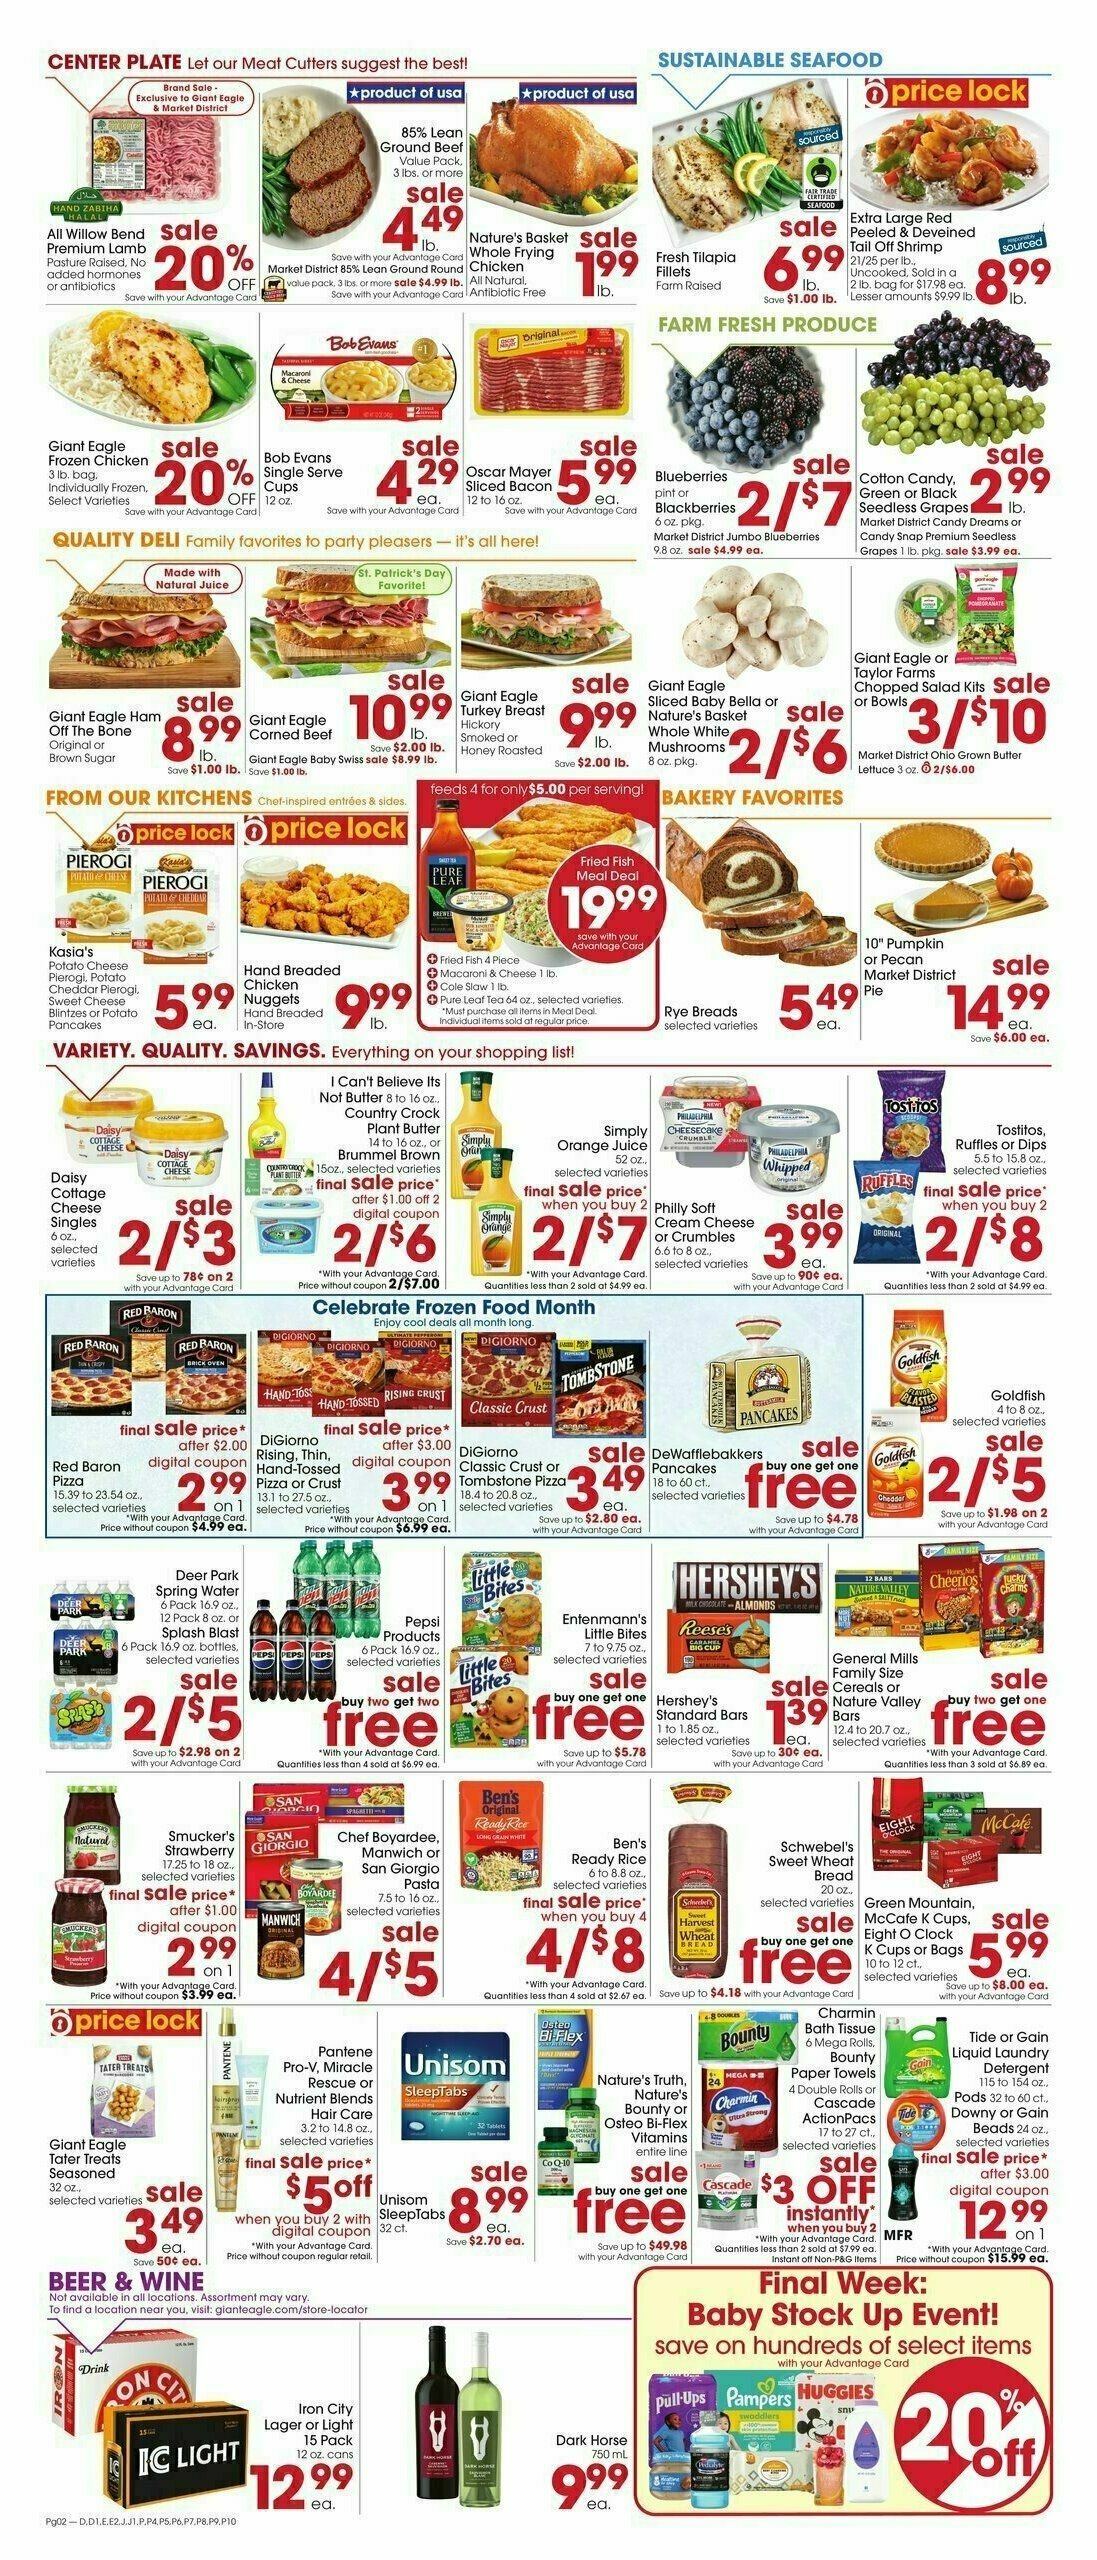 Giant Eagle Weekly Ad from March 7